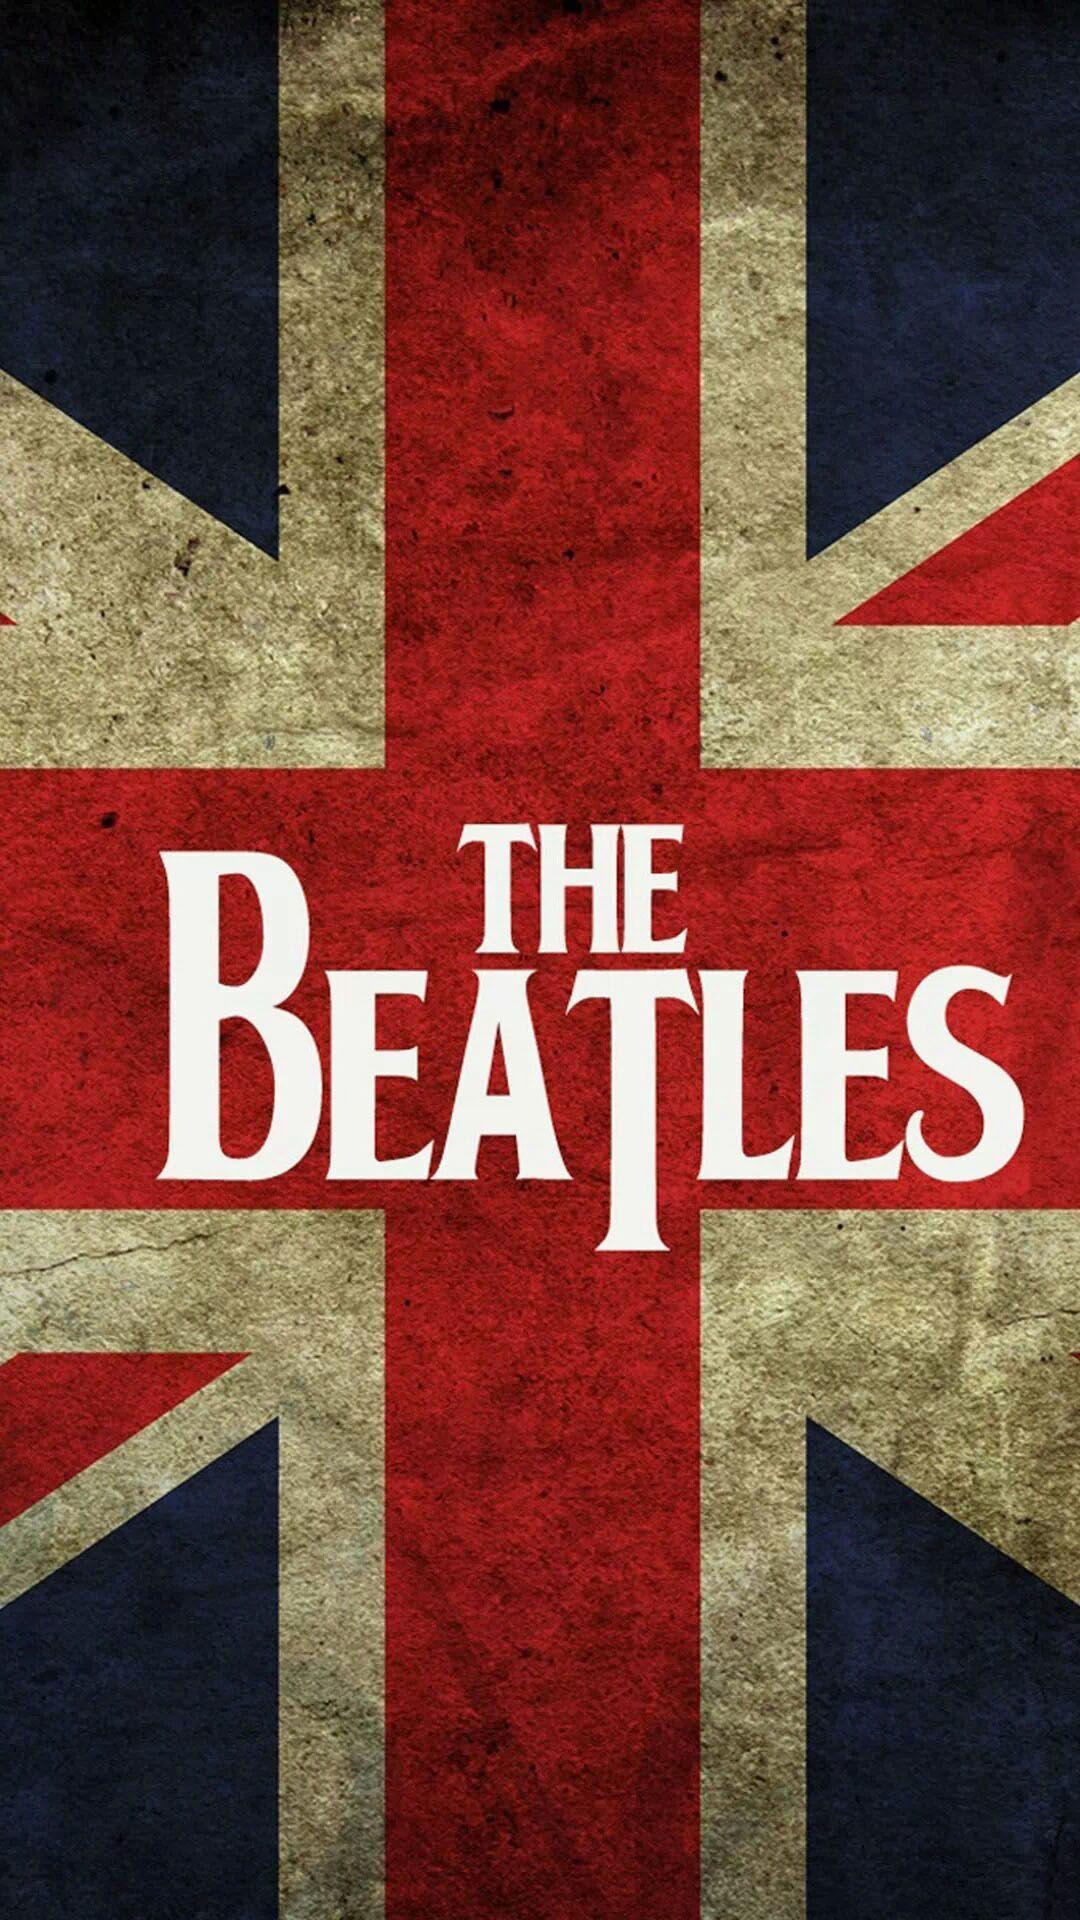 The Beatles Wallpaper Android. Beautiful